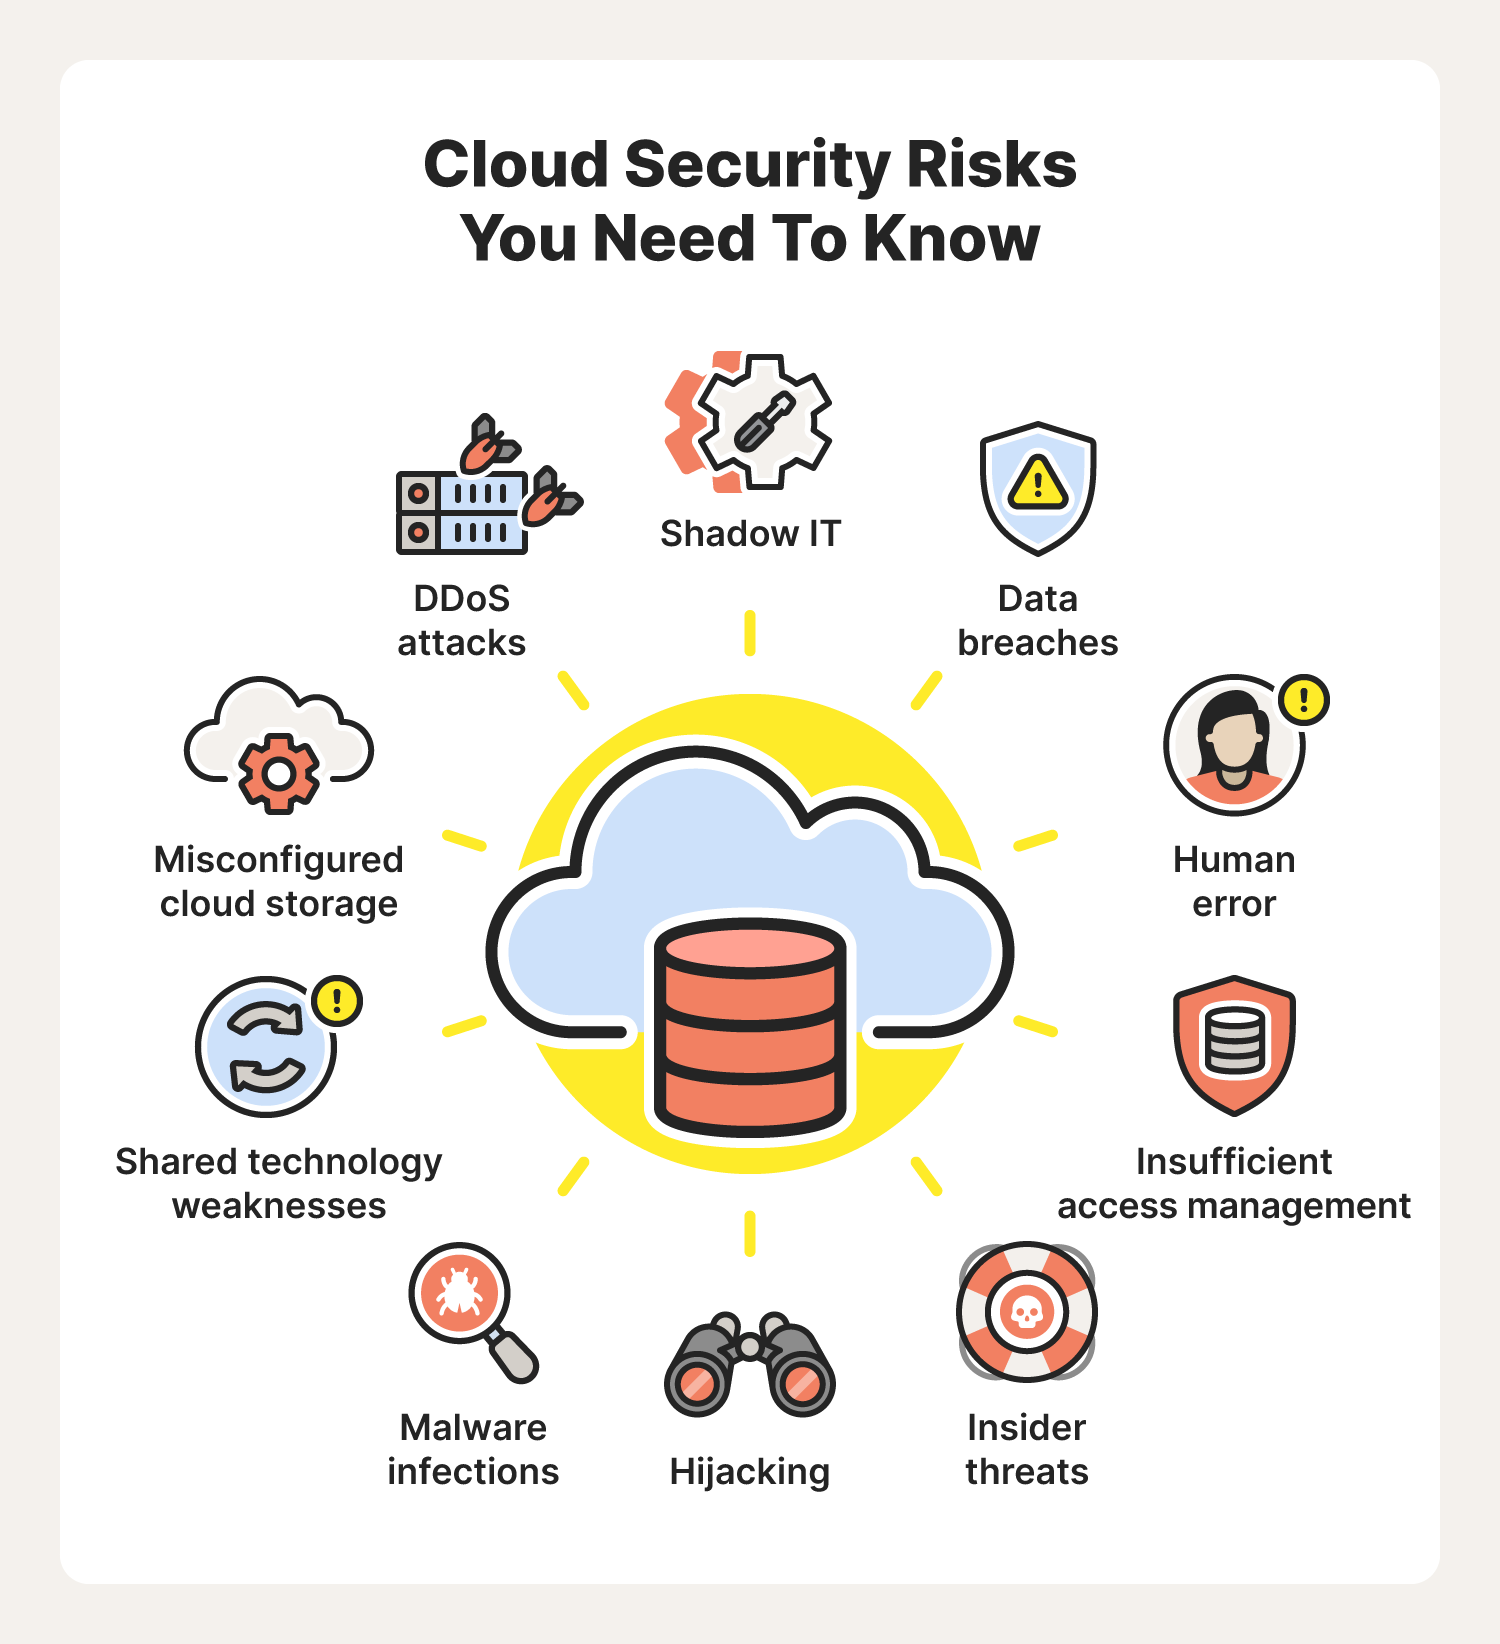 23 cloud security risks, threats, and best practices - Norton